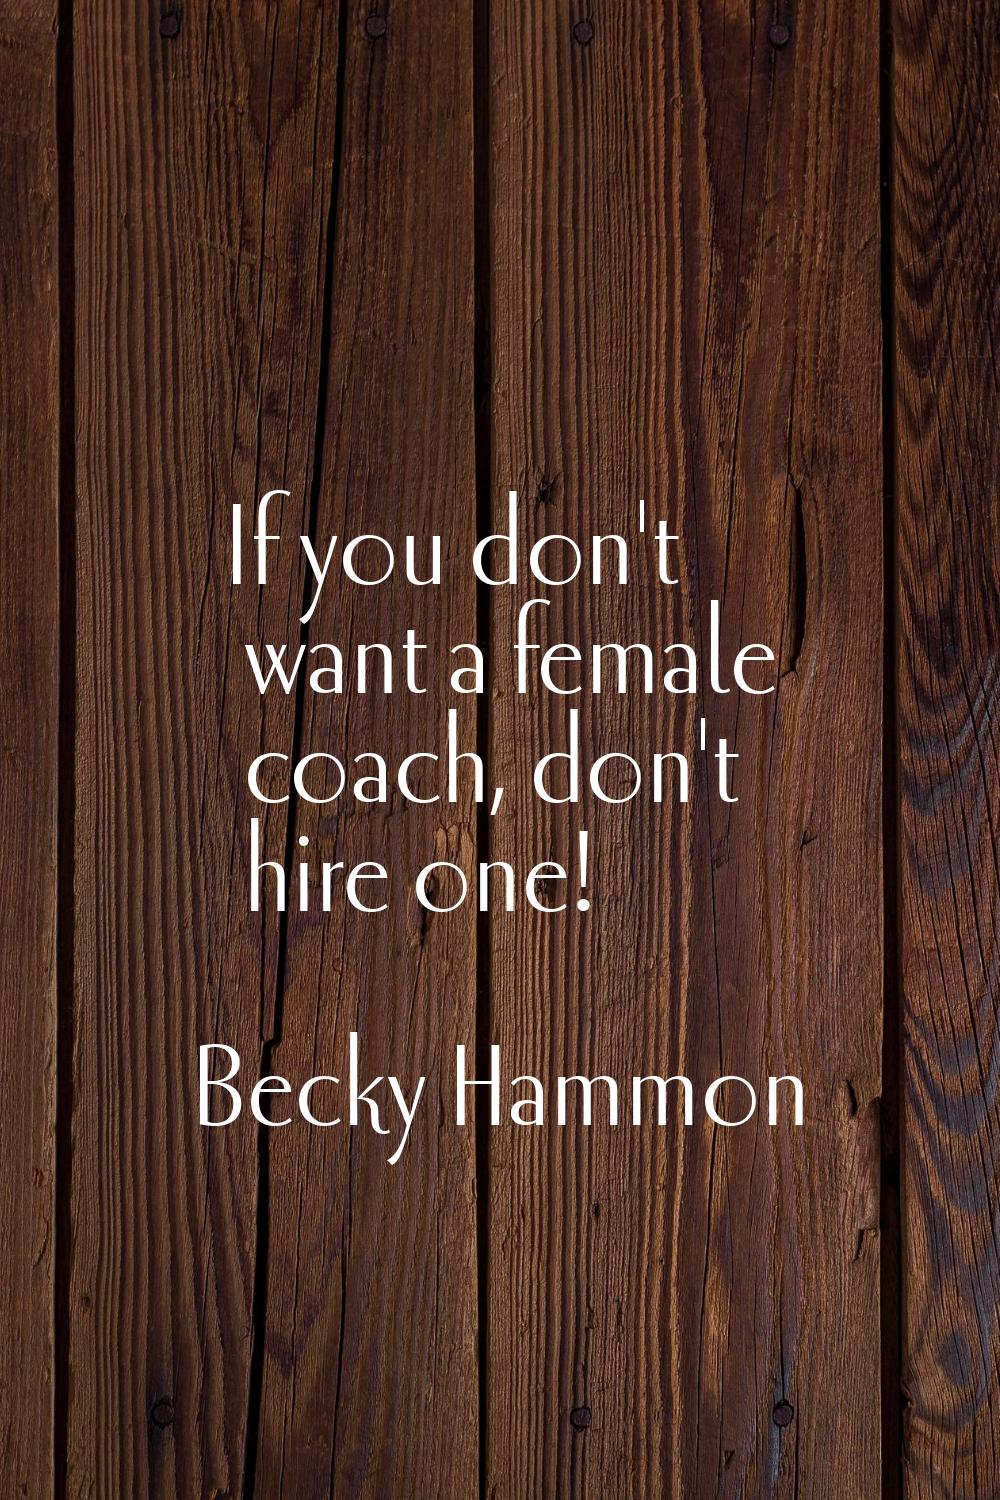 If you don't want a female coach, don't hire one!